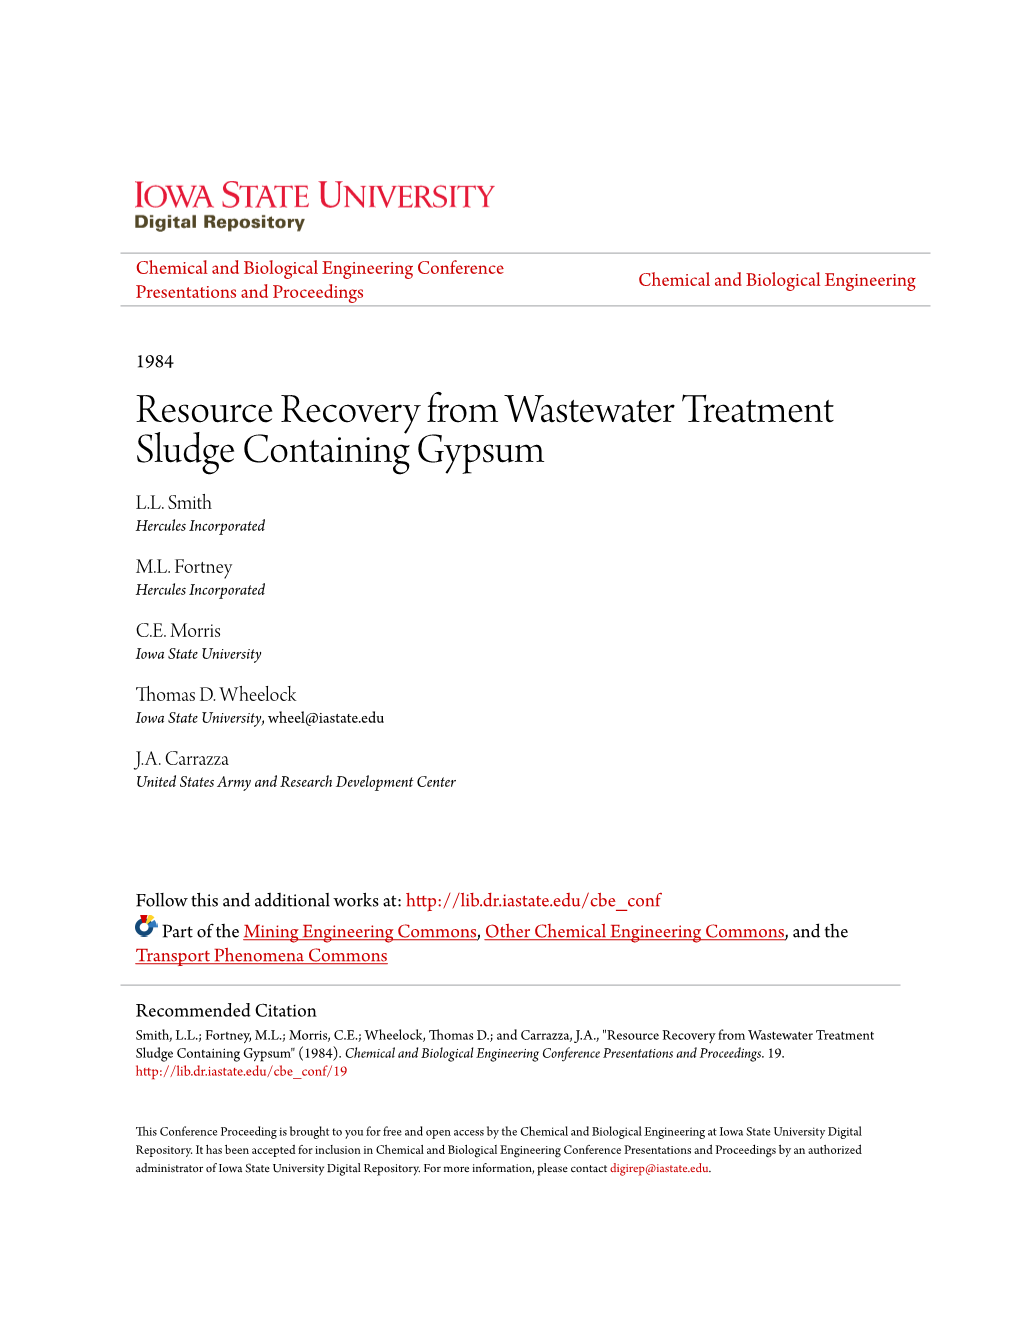 Resource Recovery from Wastewater Treatment Sludge Containing Gypsum L.L